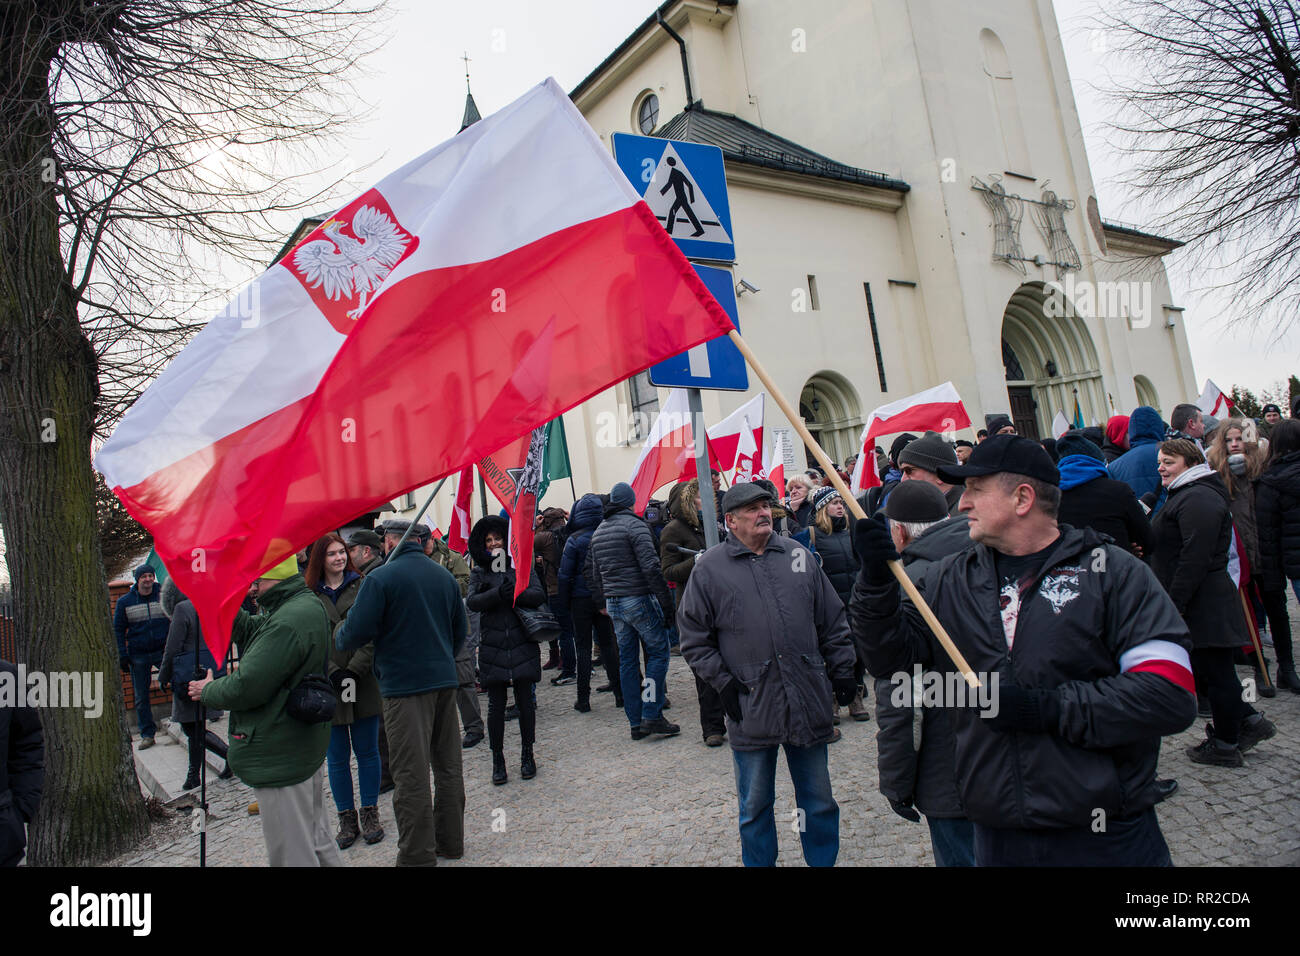 A nationalist is seen waving the Polish flag during the march. Polish nationalists organized a commemorative march of the “Cursed Soldiers” in the city of Hajnowka next to the Belarusian border. The Cursed Soldiers also known as the Doomed Soldiers were anti-communist resistant fighters after WWII, however they were also famous of committing crimes against civilians, mostly ethnic Belarusians. Stock Photo